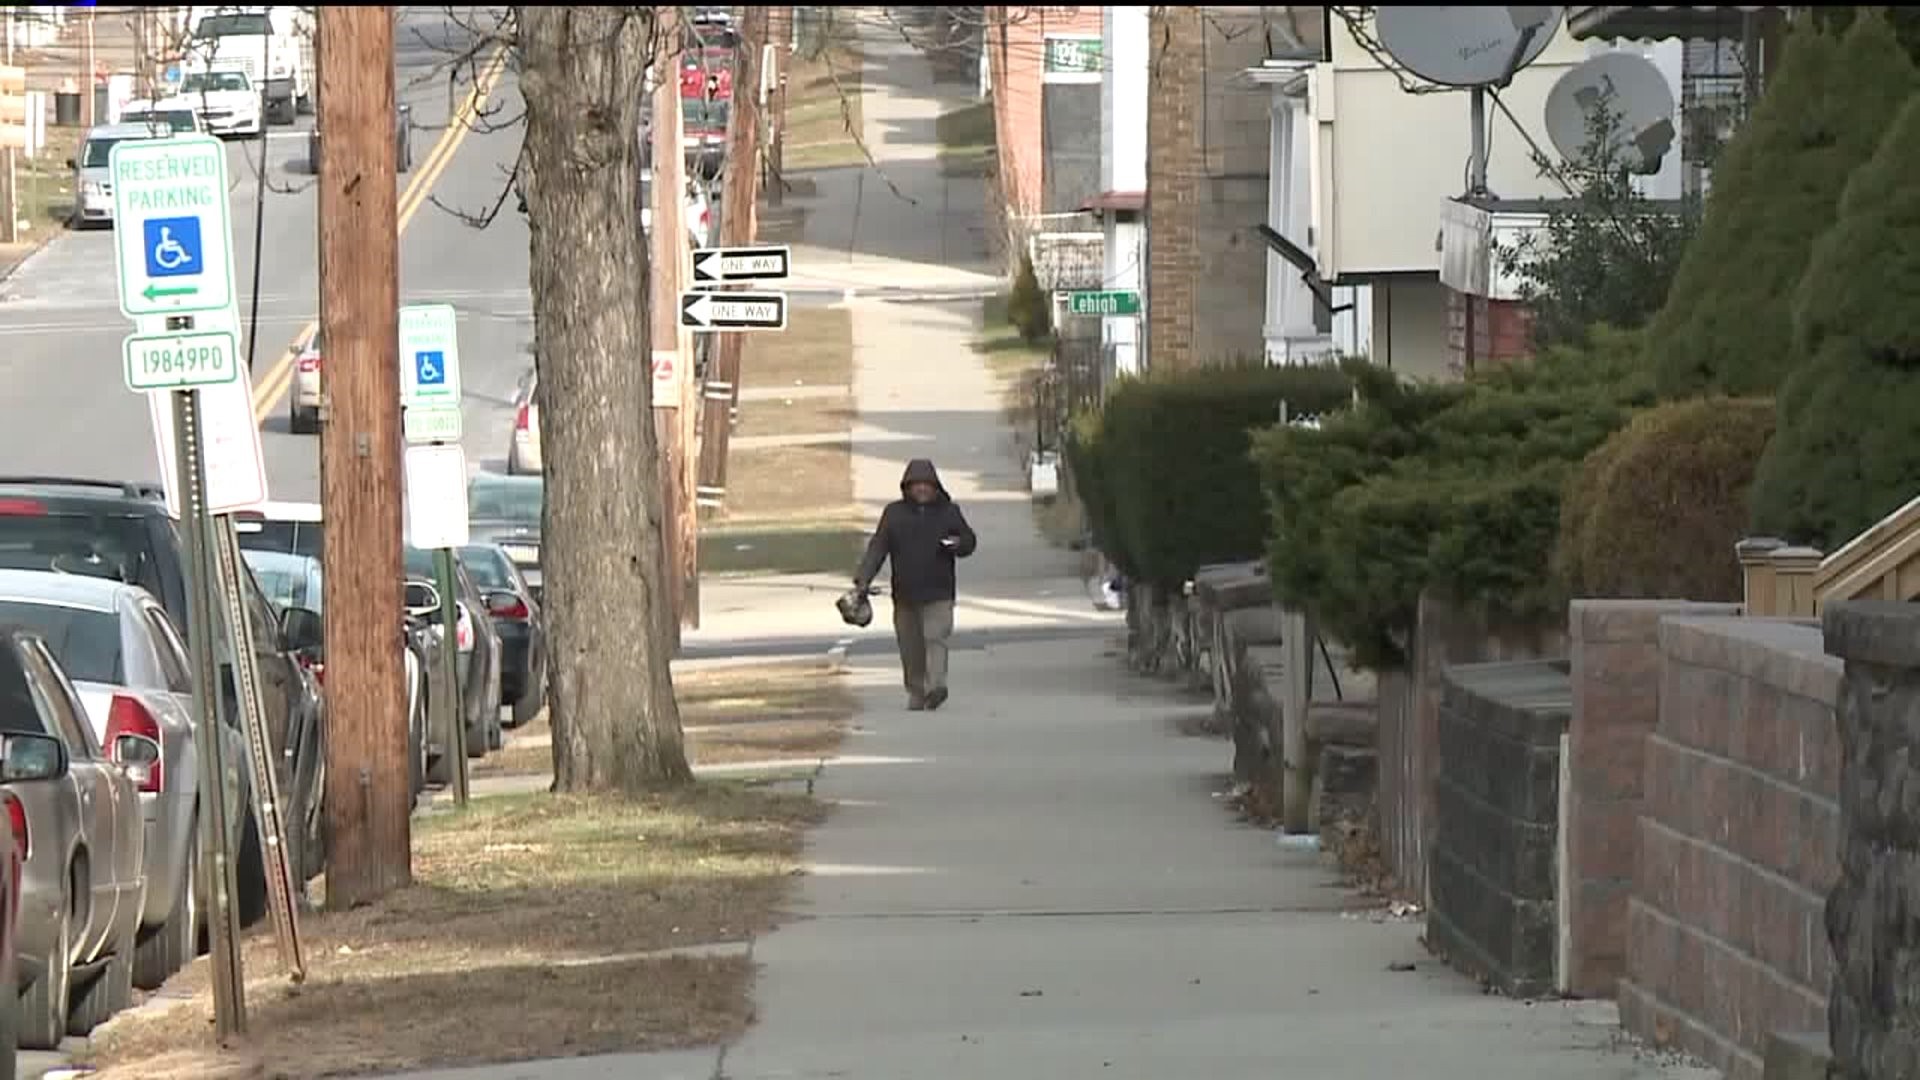 More Reports of Strong-arm Robberies in Wilkes-Barre